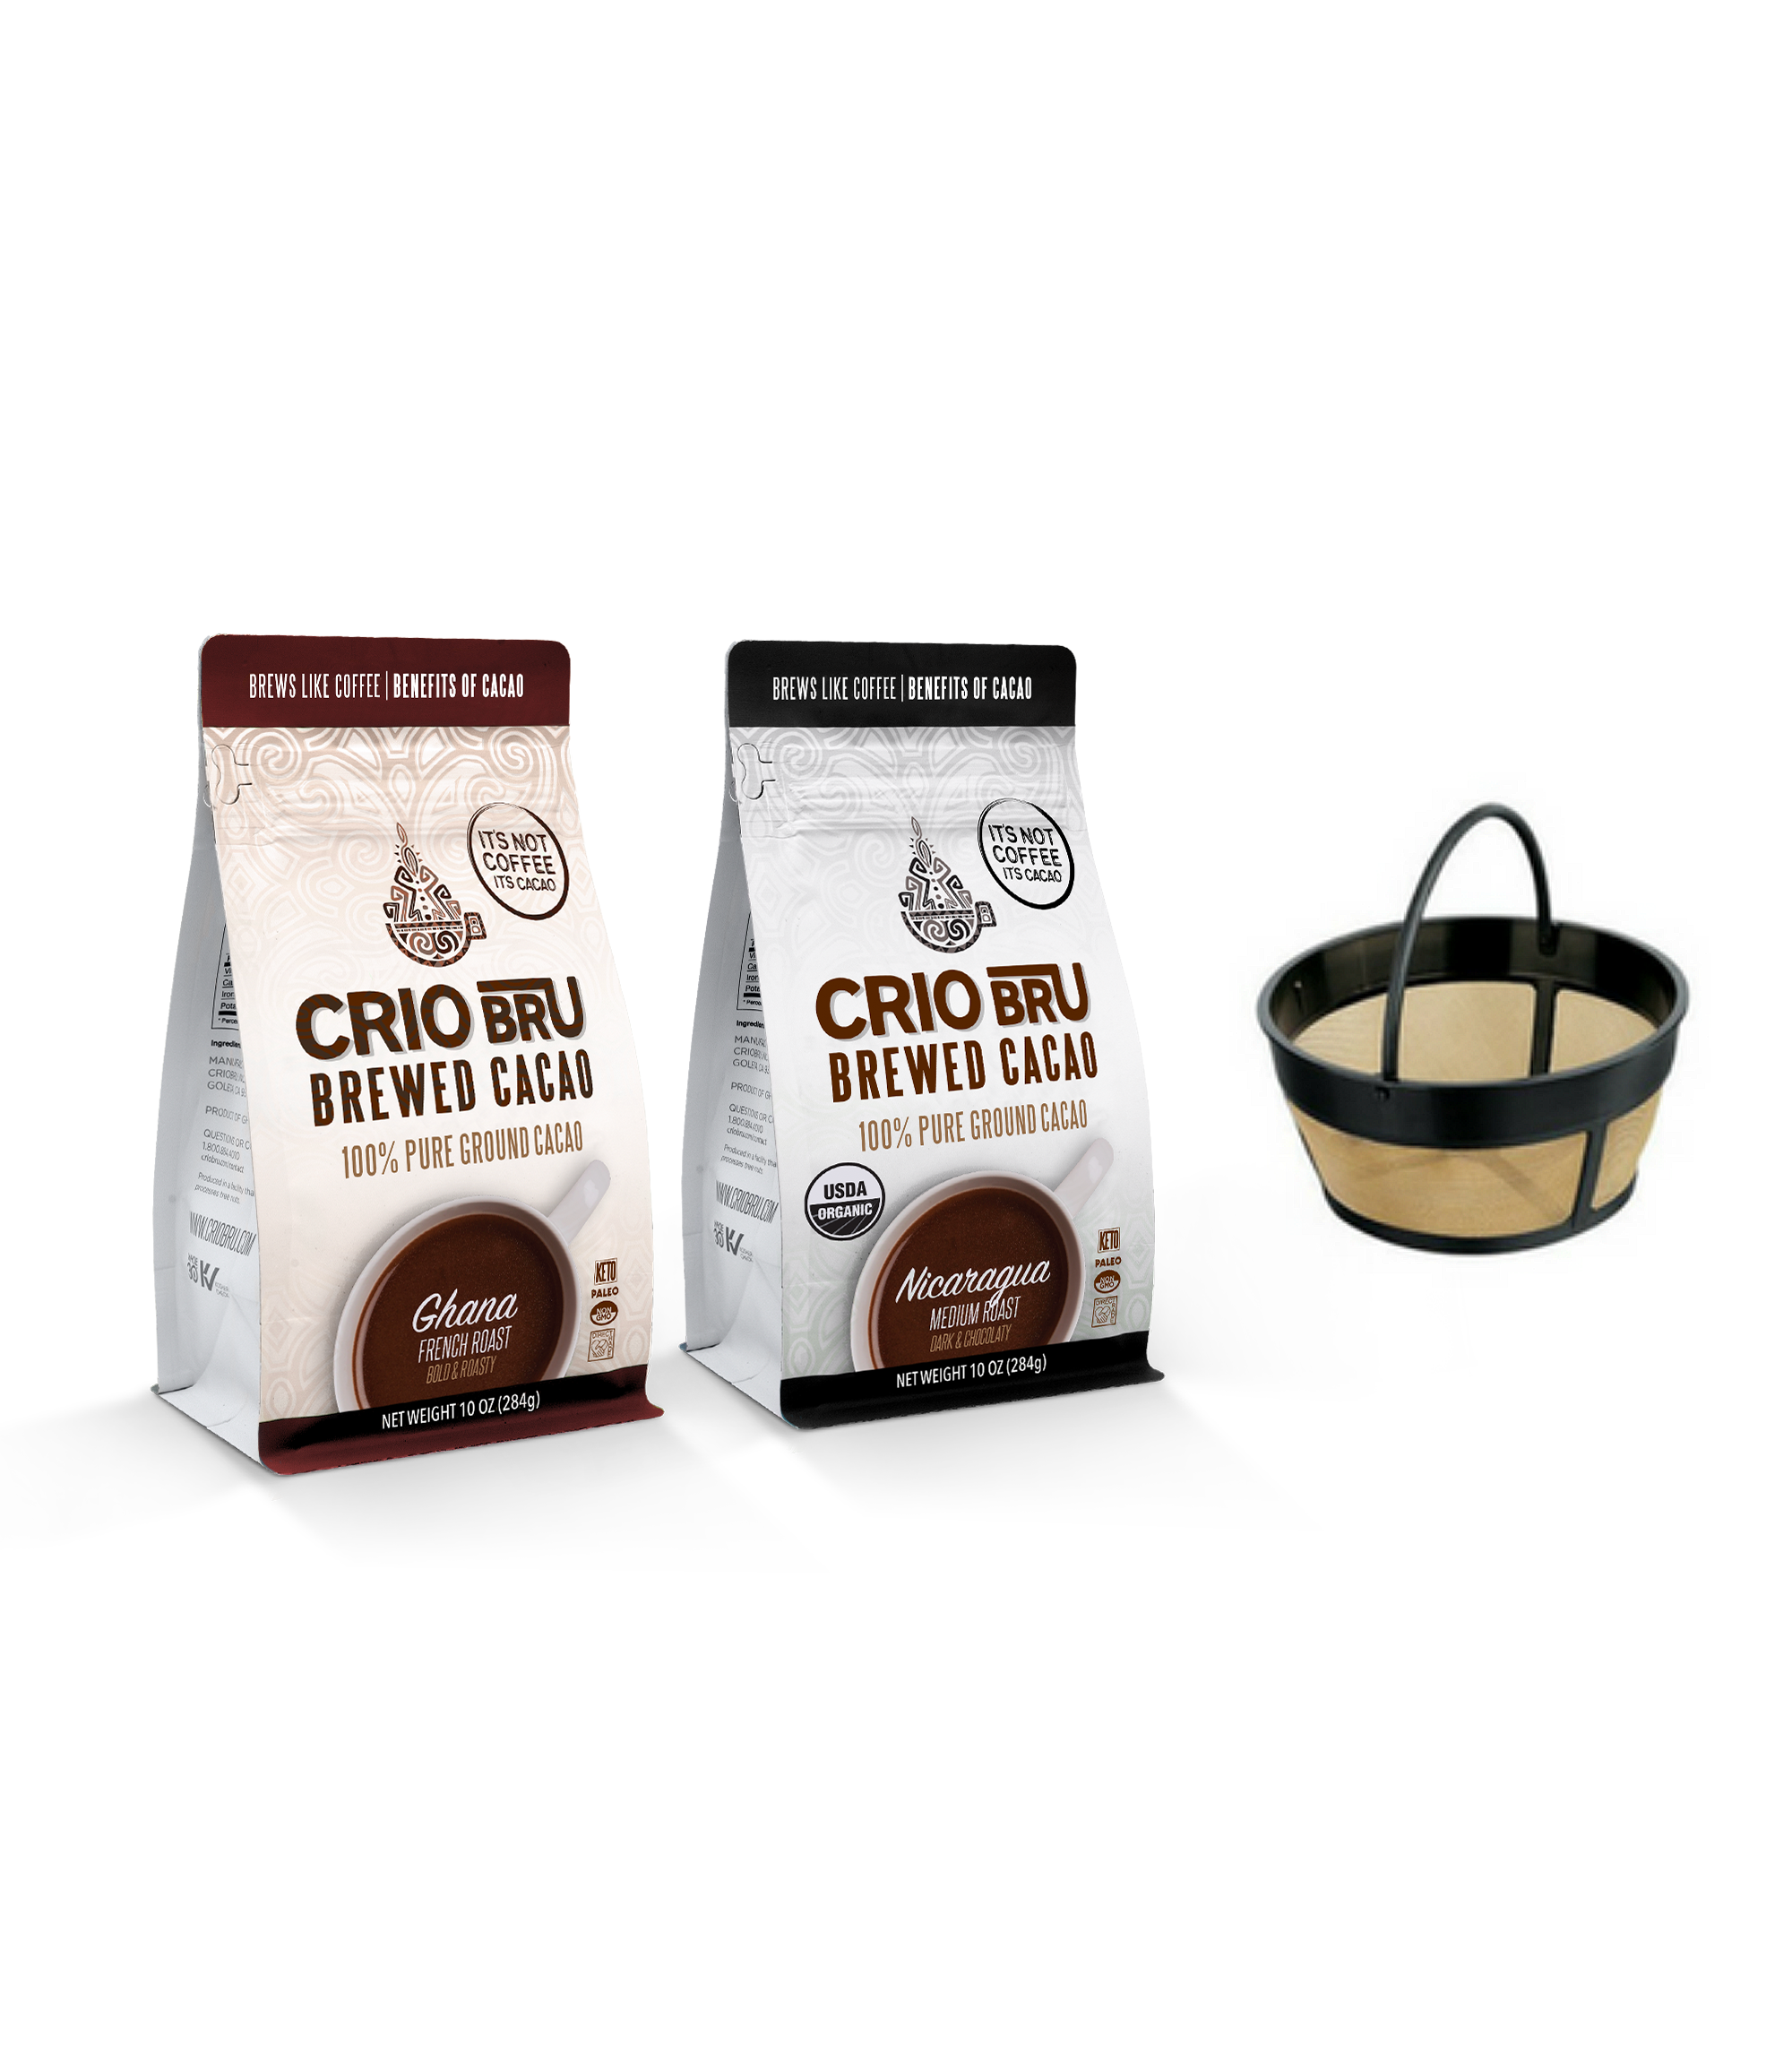 Crio Bru: Brewed Cacao | It's not coffee, it's cacao!